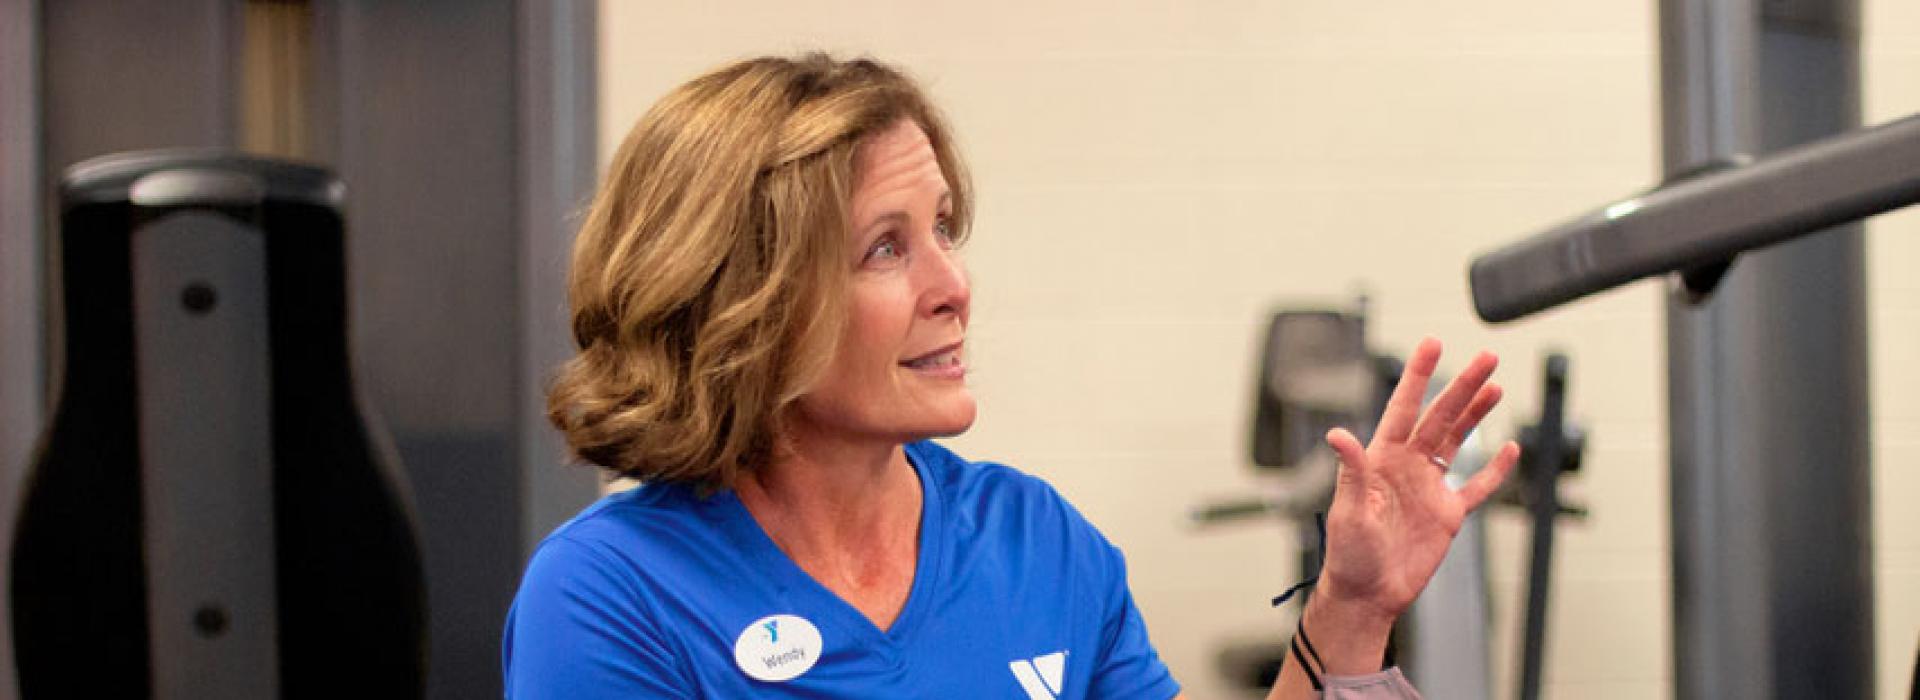 Oscar Lasko YMCA personal trainer Wendy Young instructs a client in the fitness center of the Oscar Lasko YMCA in West Chester PA